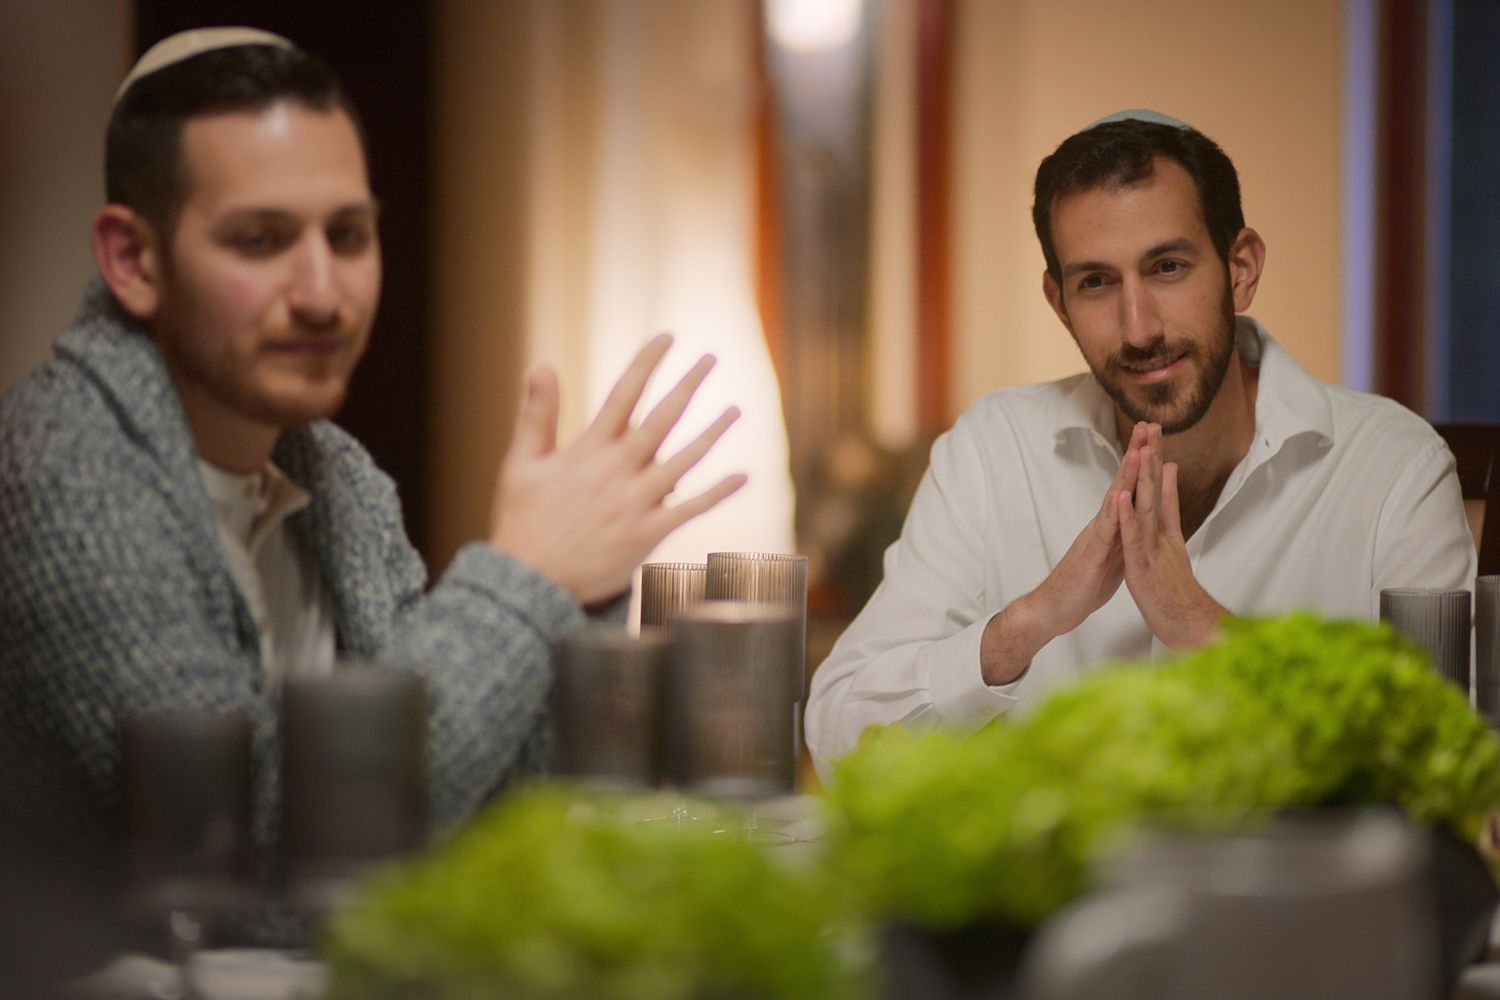 Netflix's Jewish Matchmaking Follows Singles Looking for Love